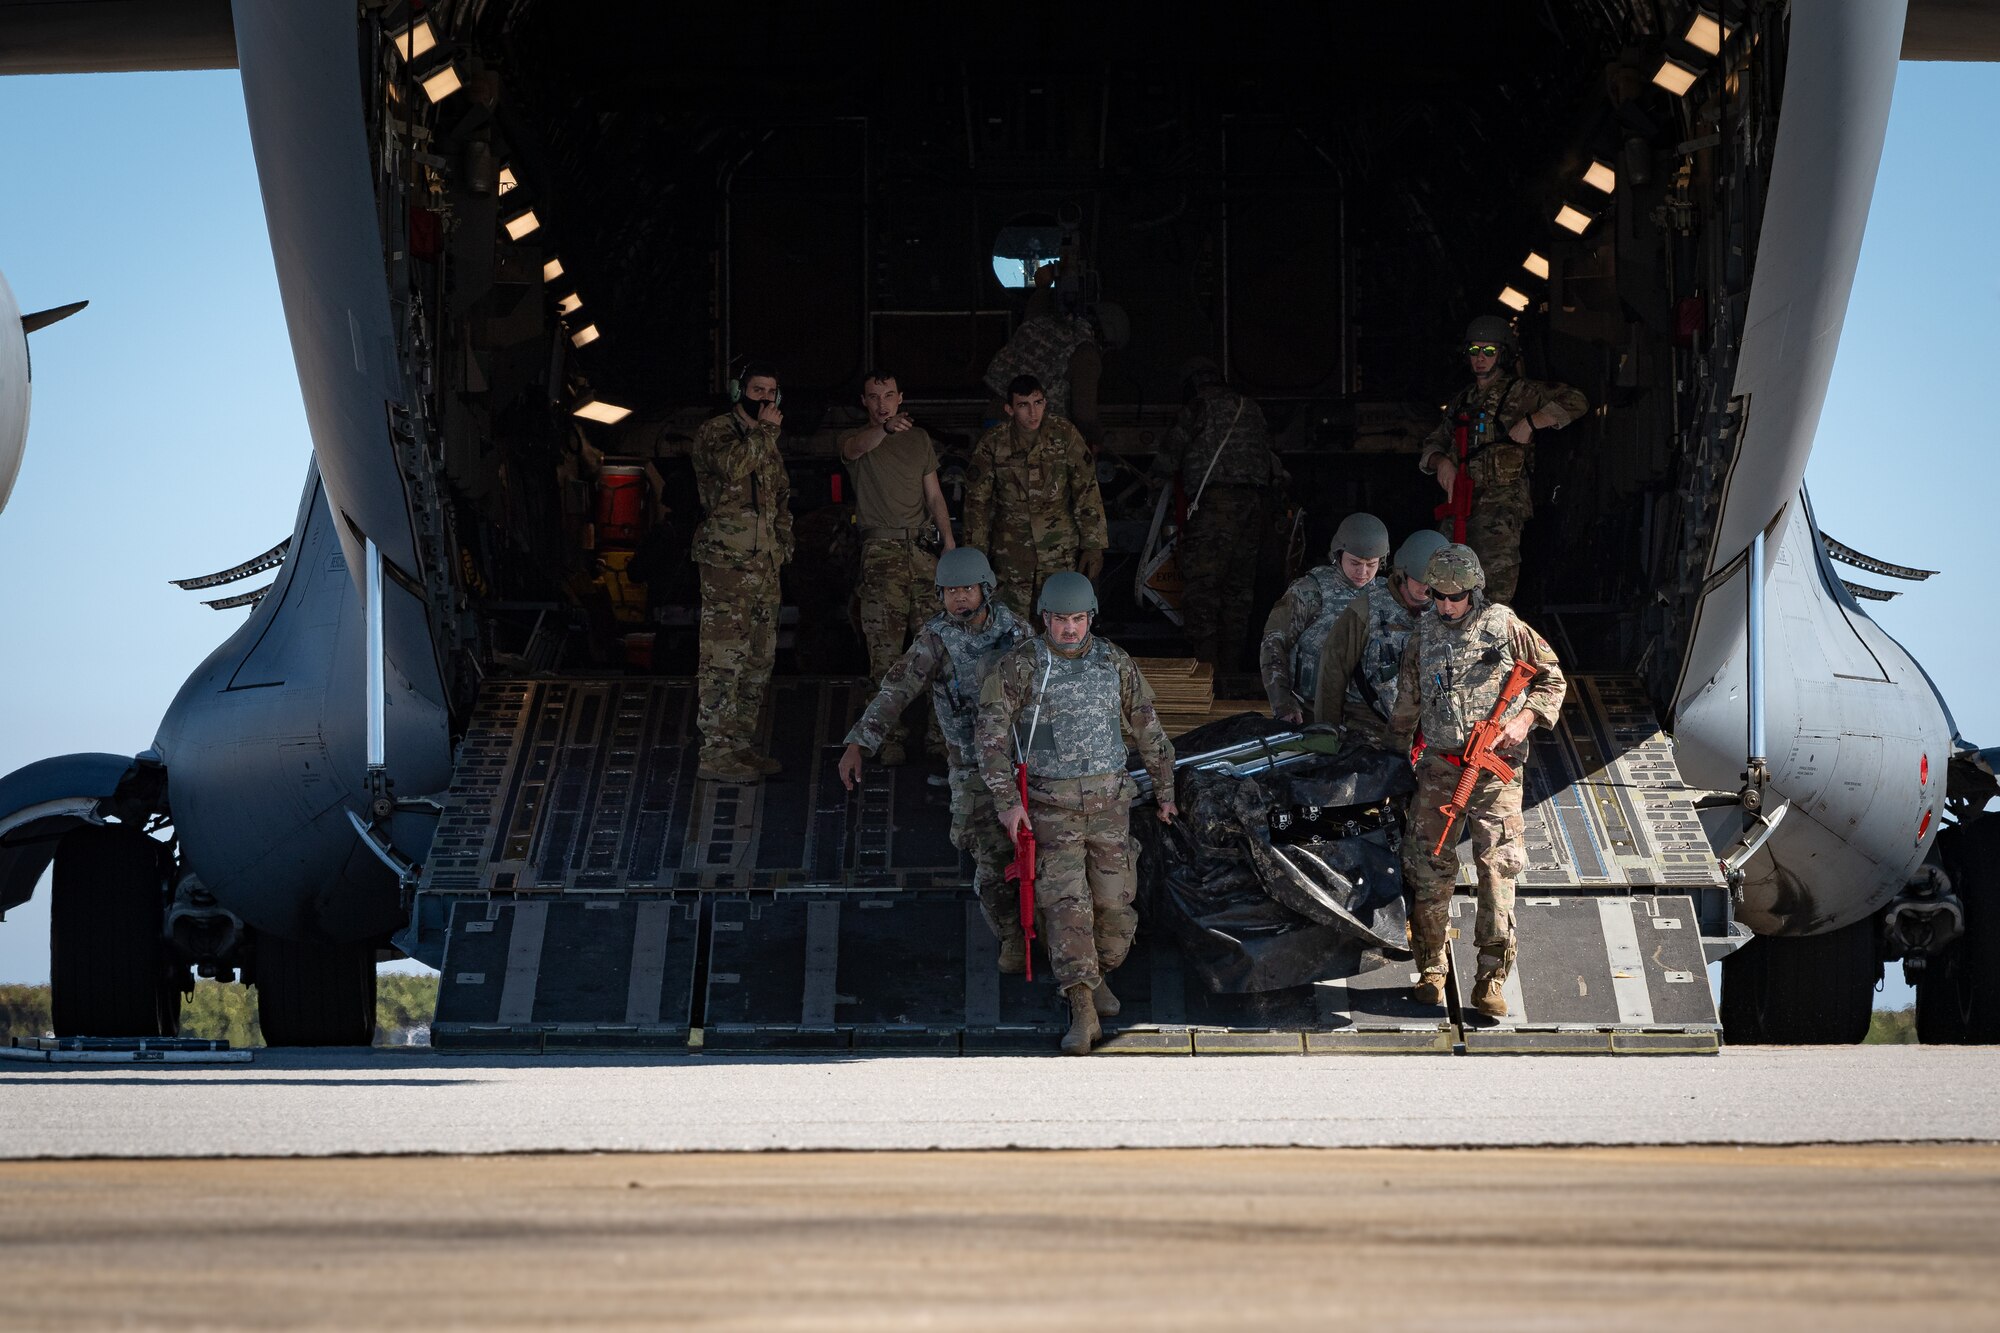 A photo of Airmen offloading cargo from an aircraft